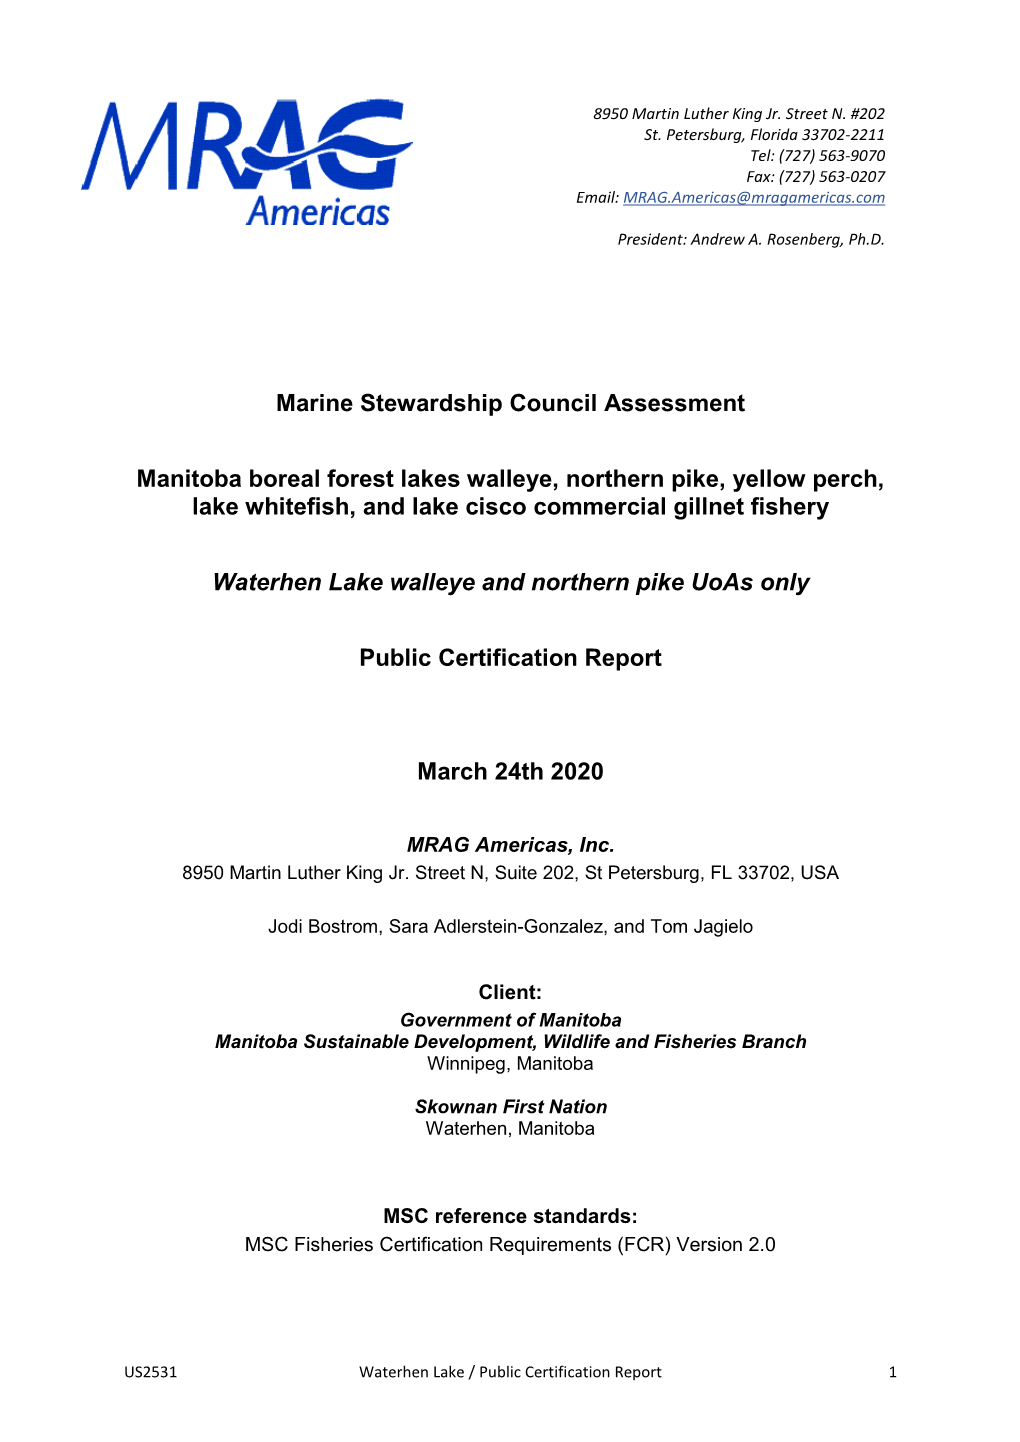 Marine Stewardship Council Assessment Manitoba Boreal Forest Lakes Walleye, Northern Pike, Yellow Perch, Lake Whitefish, And